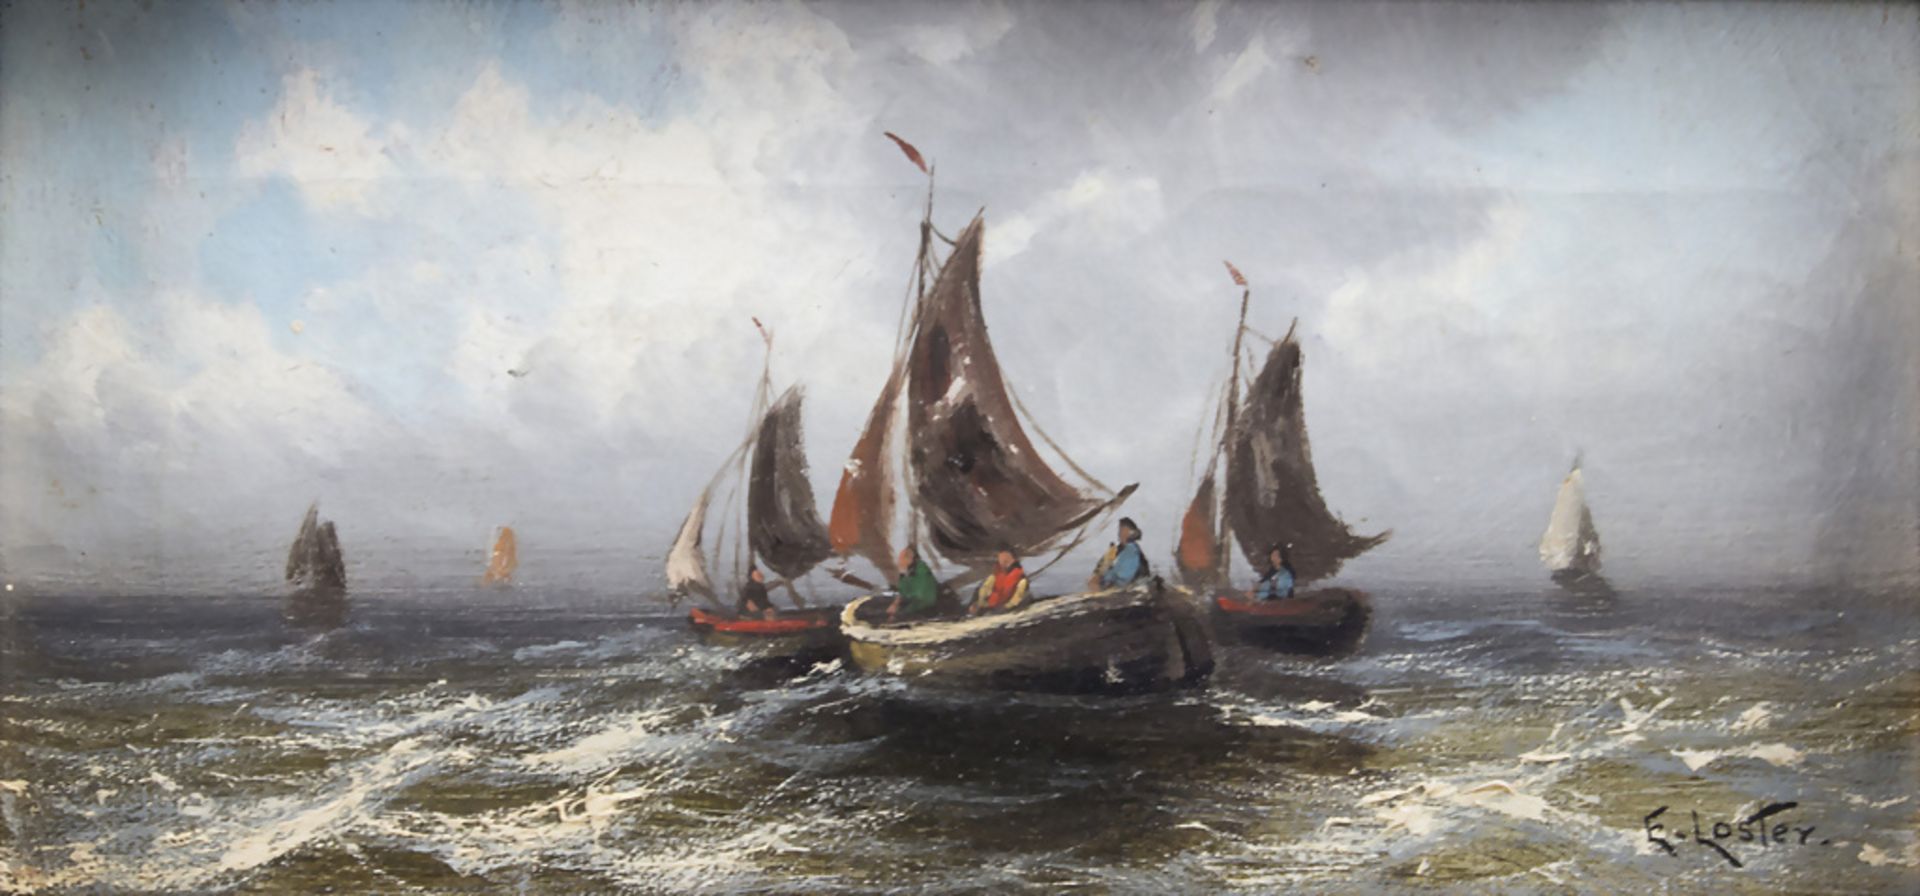 E. Loster, 'Segelboote auf See' / 'Sailing boats at sea', 19. Jh. - Image 2 of 5